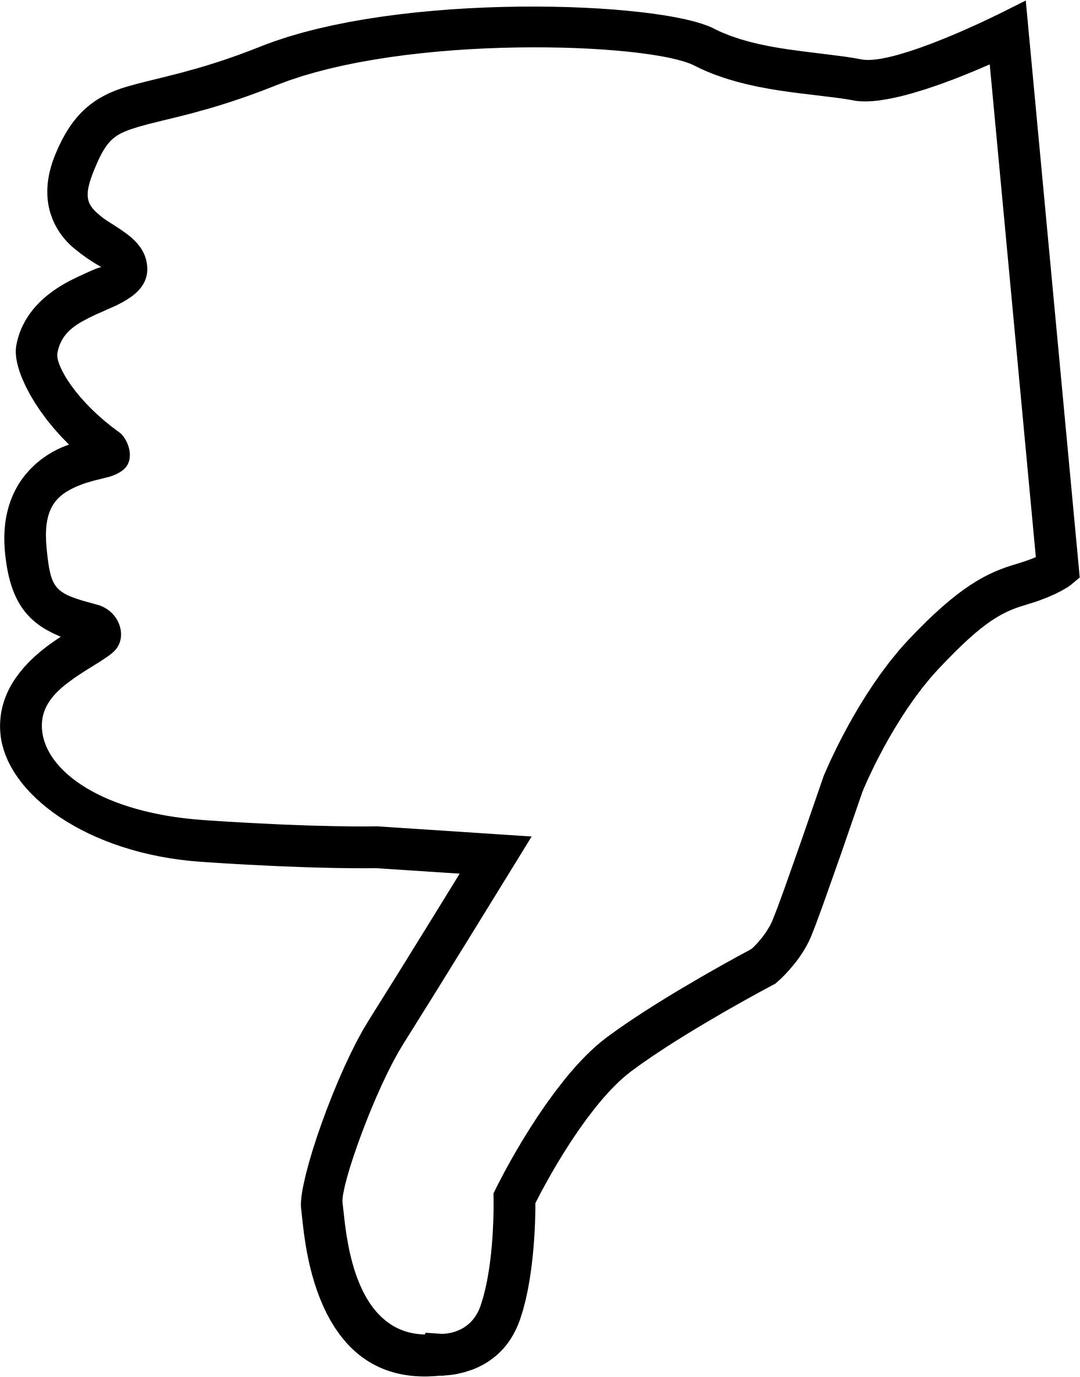 Thumbs Down png transparent